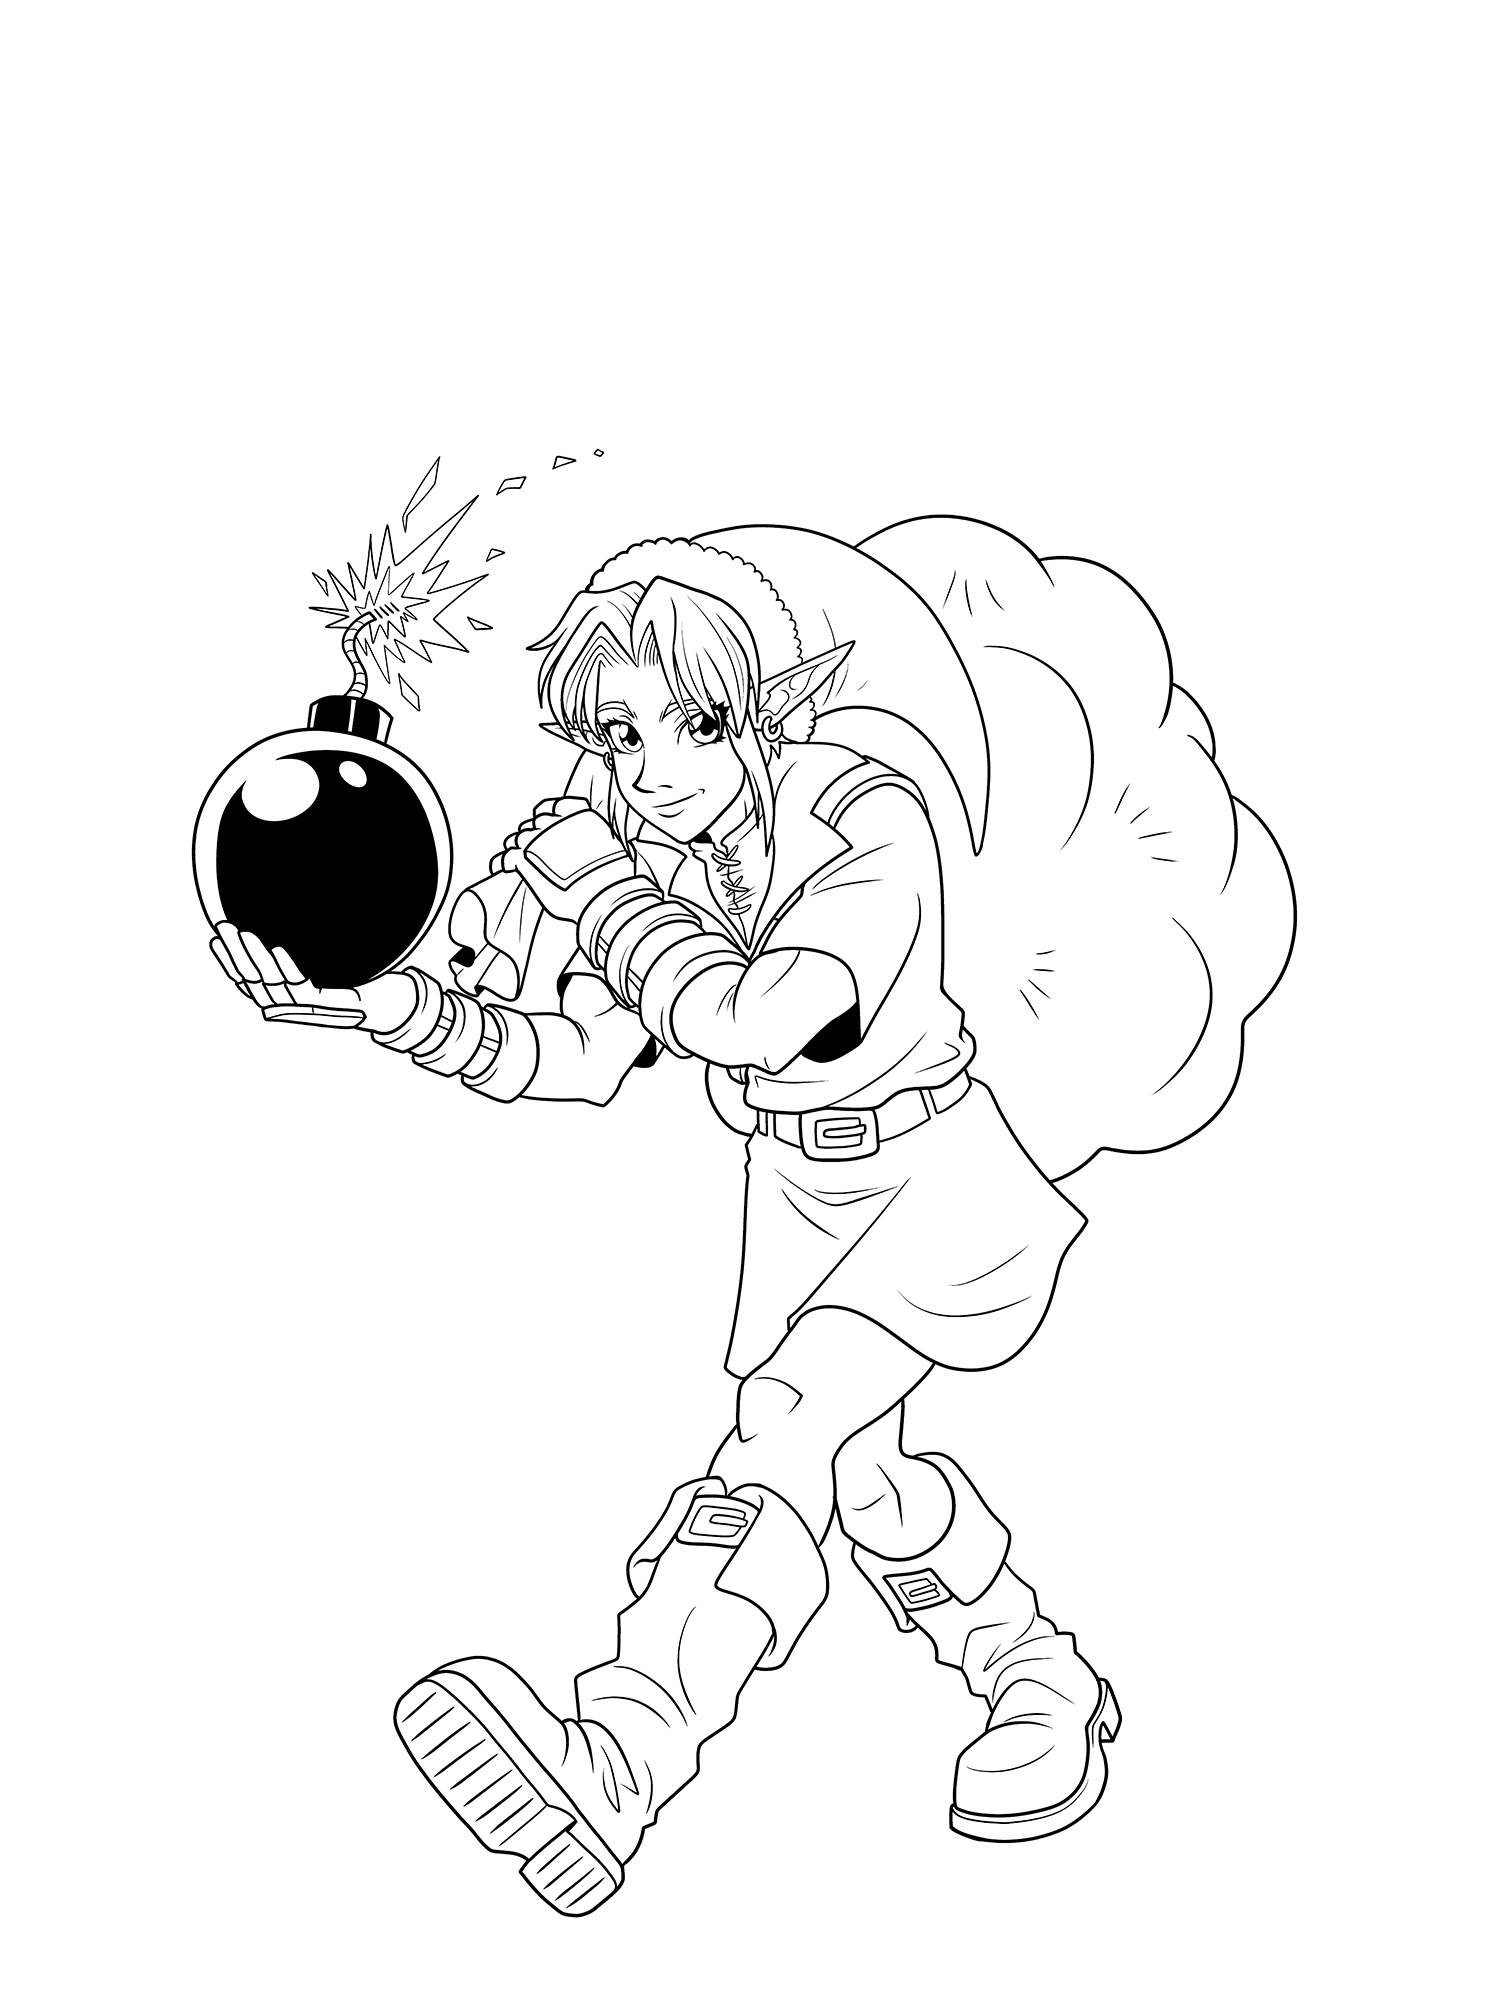 Holiday-Hero-of-Time-Lineart.jpg